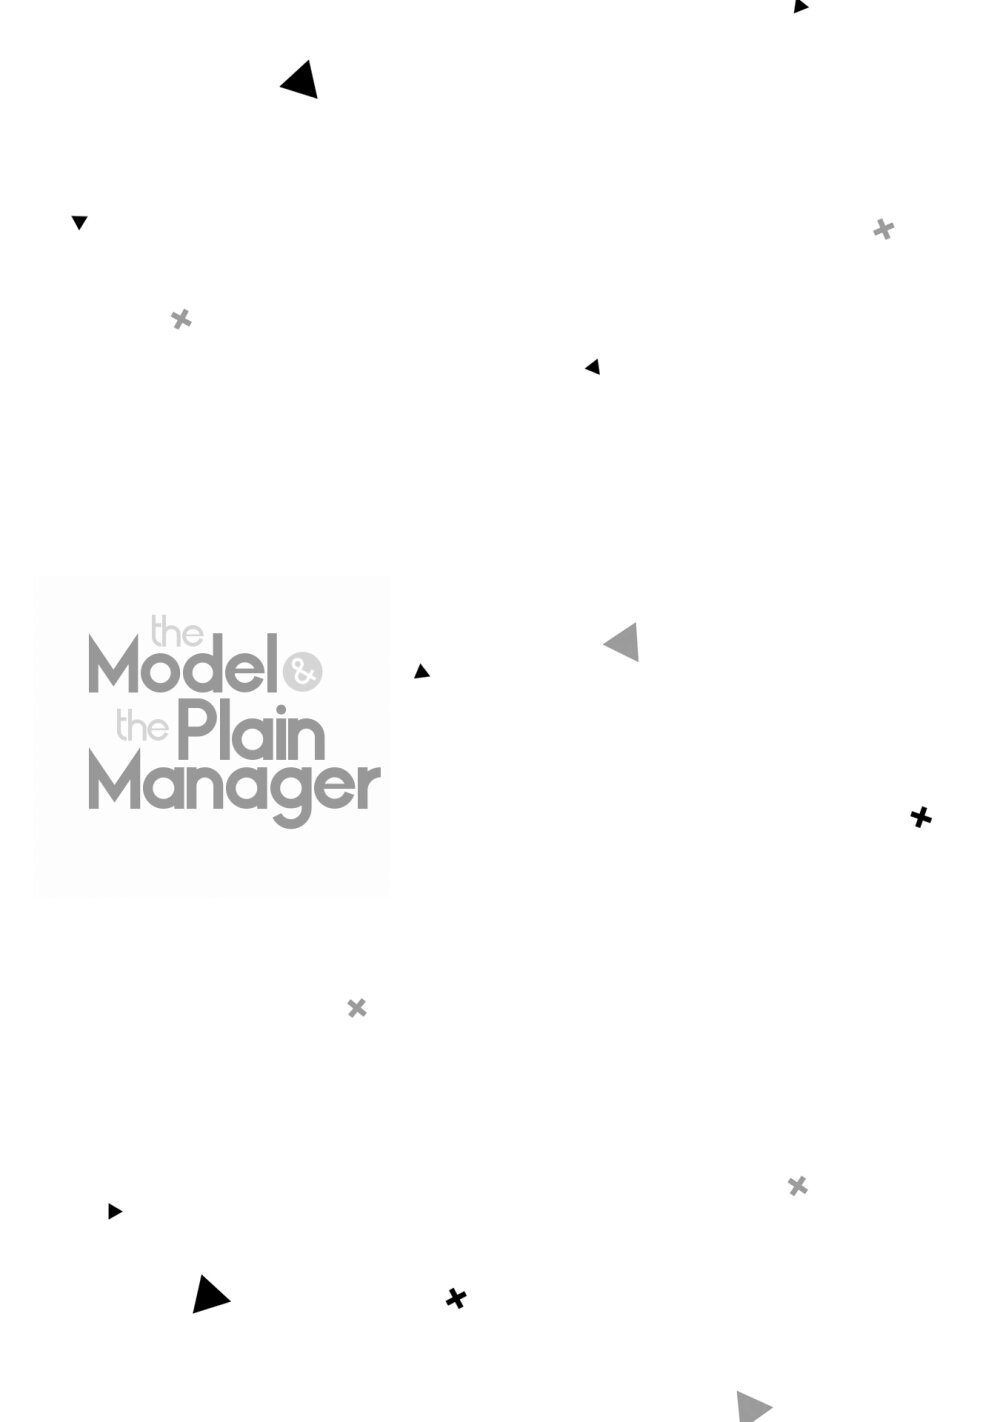 The Model and the Plain Manager 7 26